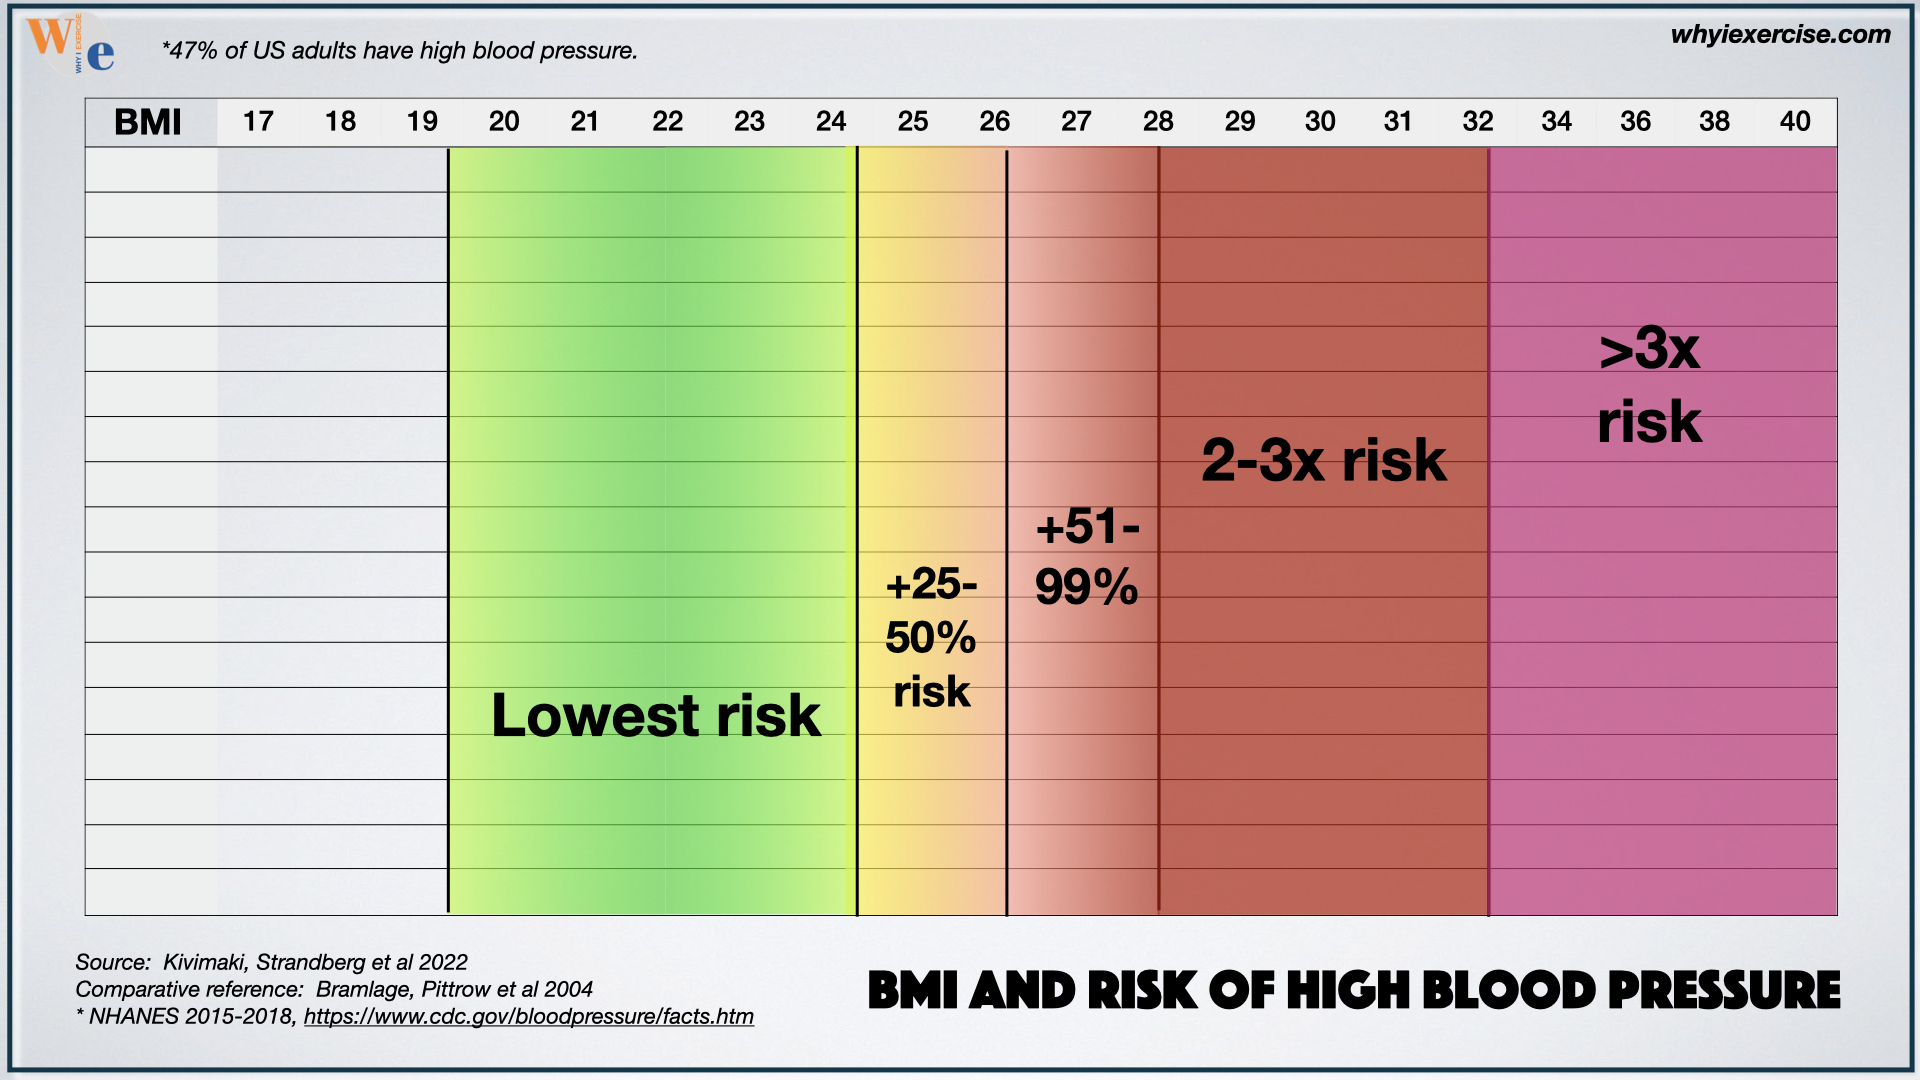 Body mass index (BMI) for adults